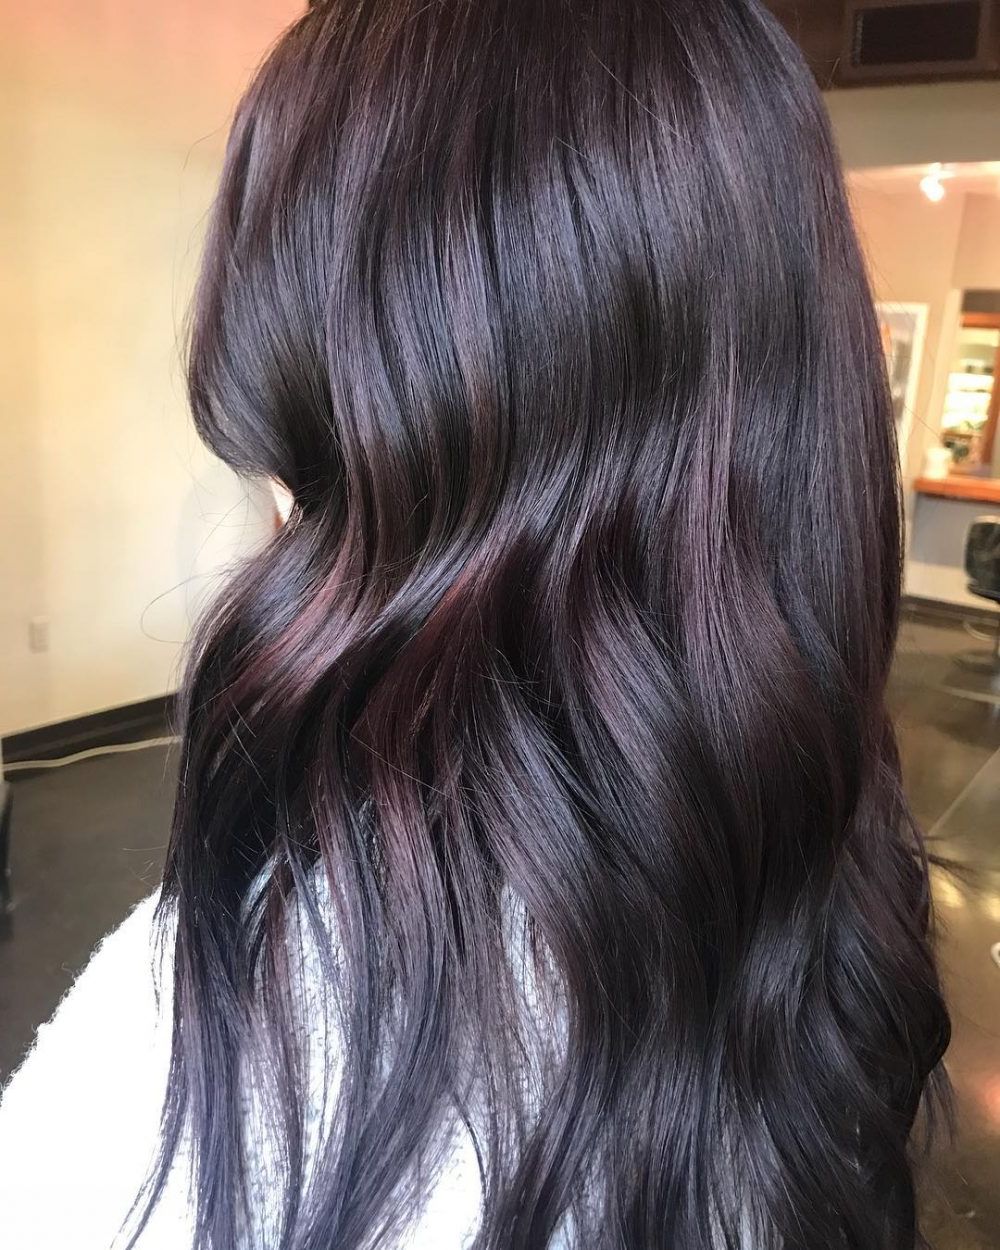 29 Flattering Dark Hair Colors For Every Skin Tone In 2018 In Disheveled Burgundy Brown Bob Hairstyles (View 19 of 20)